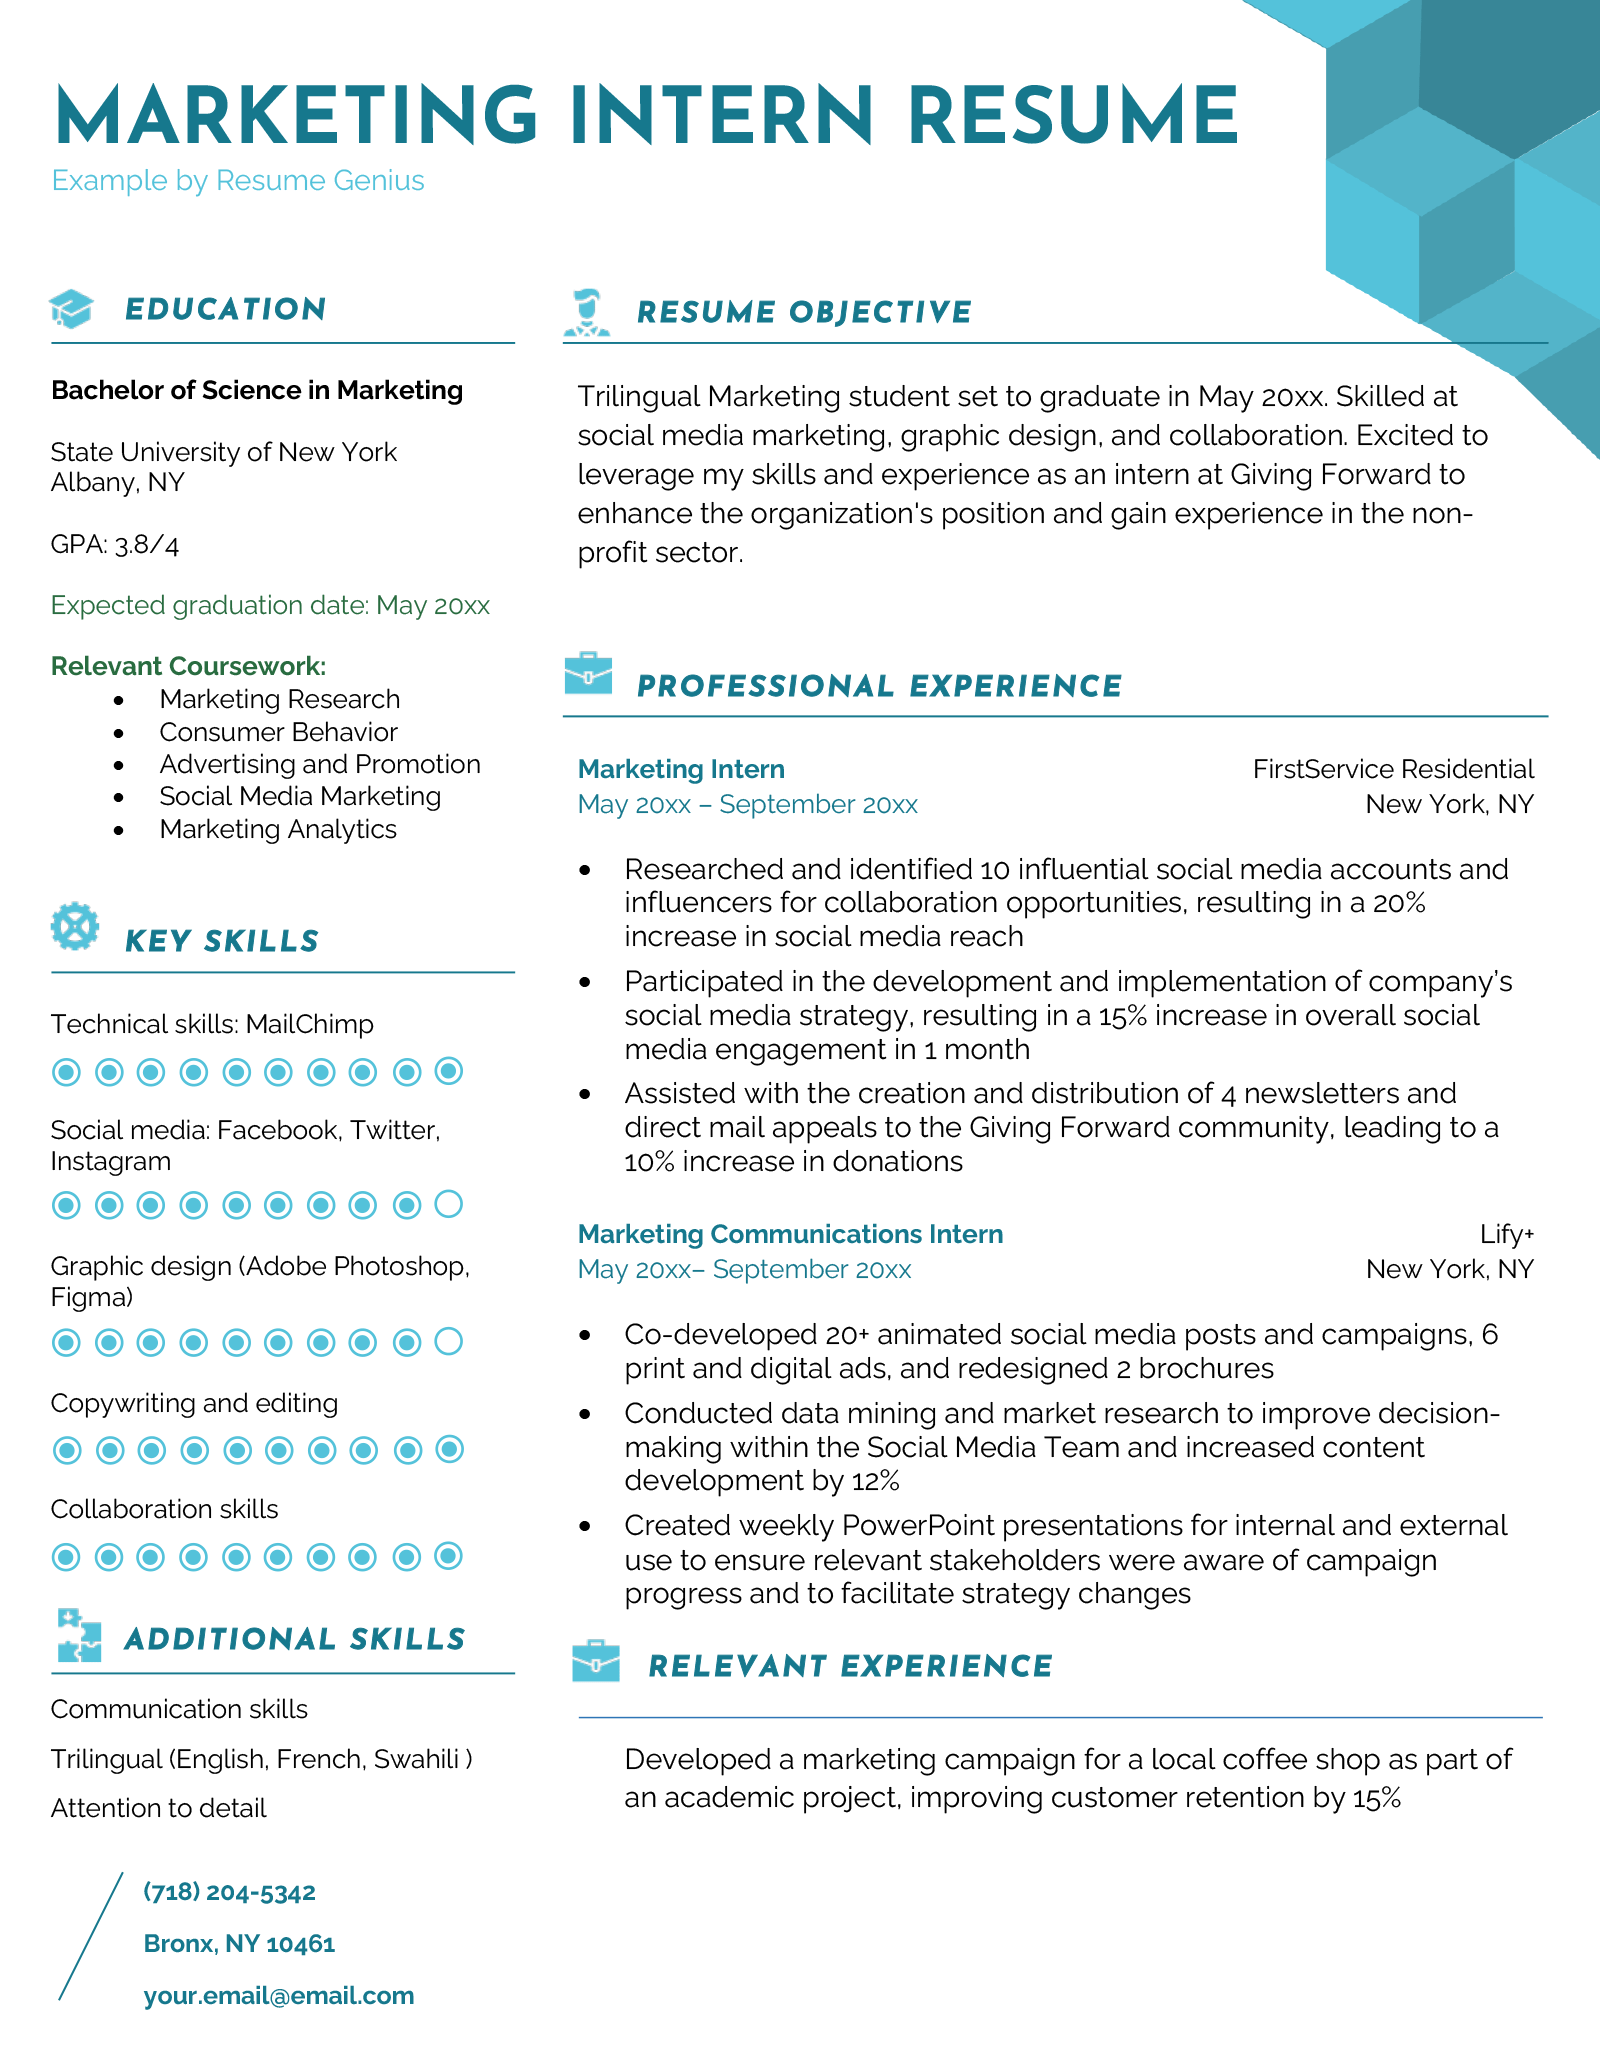 an example of of a marketing intern resume with turquoise headers